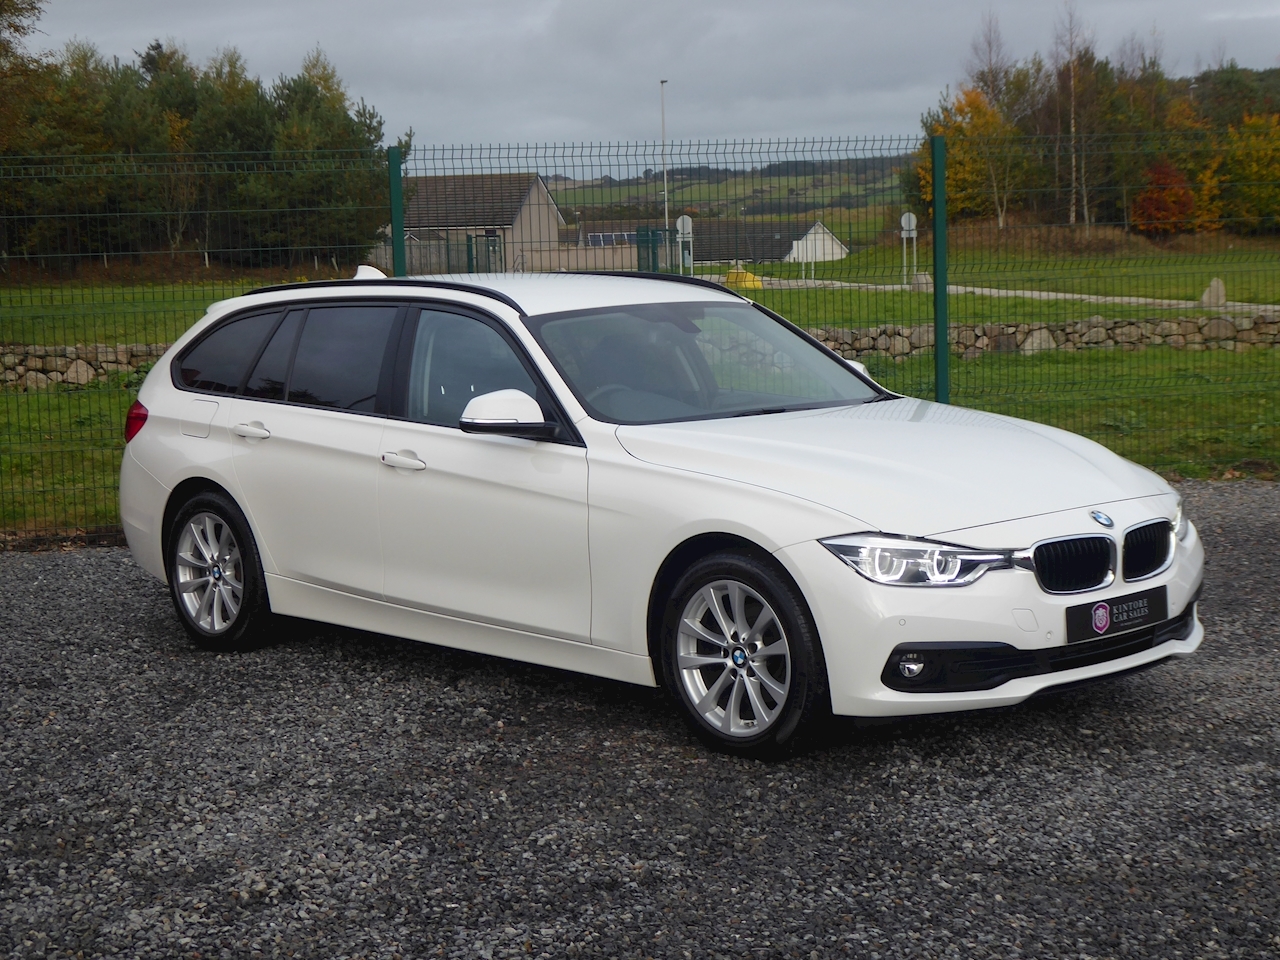 3-Series Touring 318D SE Automatic 2.0 5dr Touring Automatic Diesel